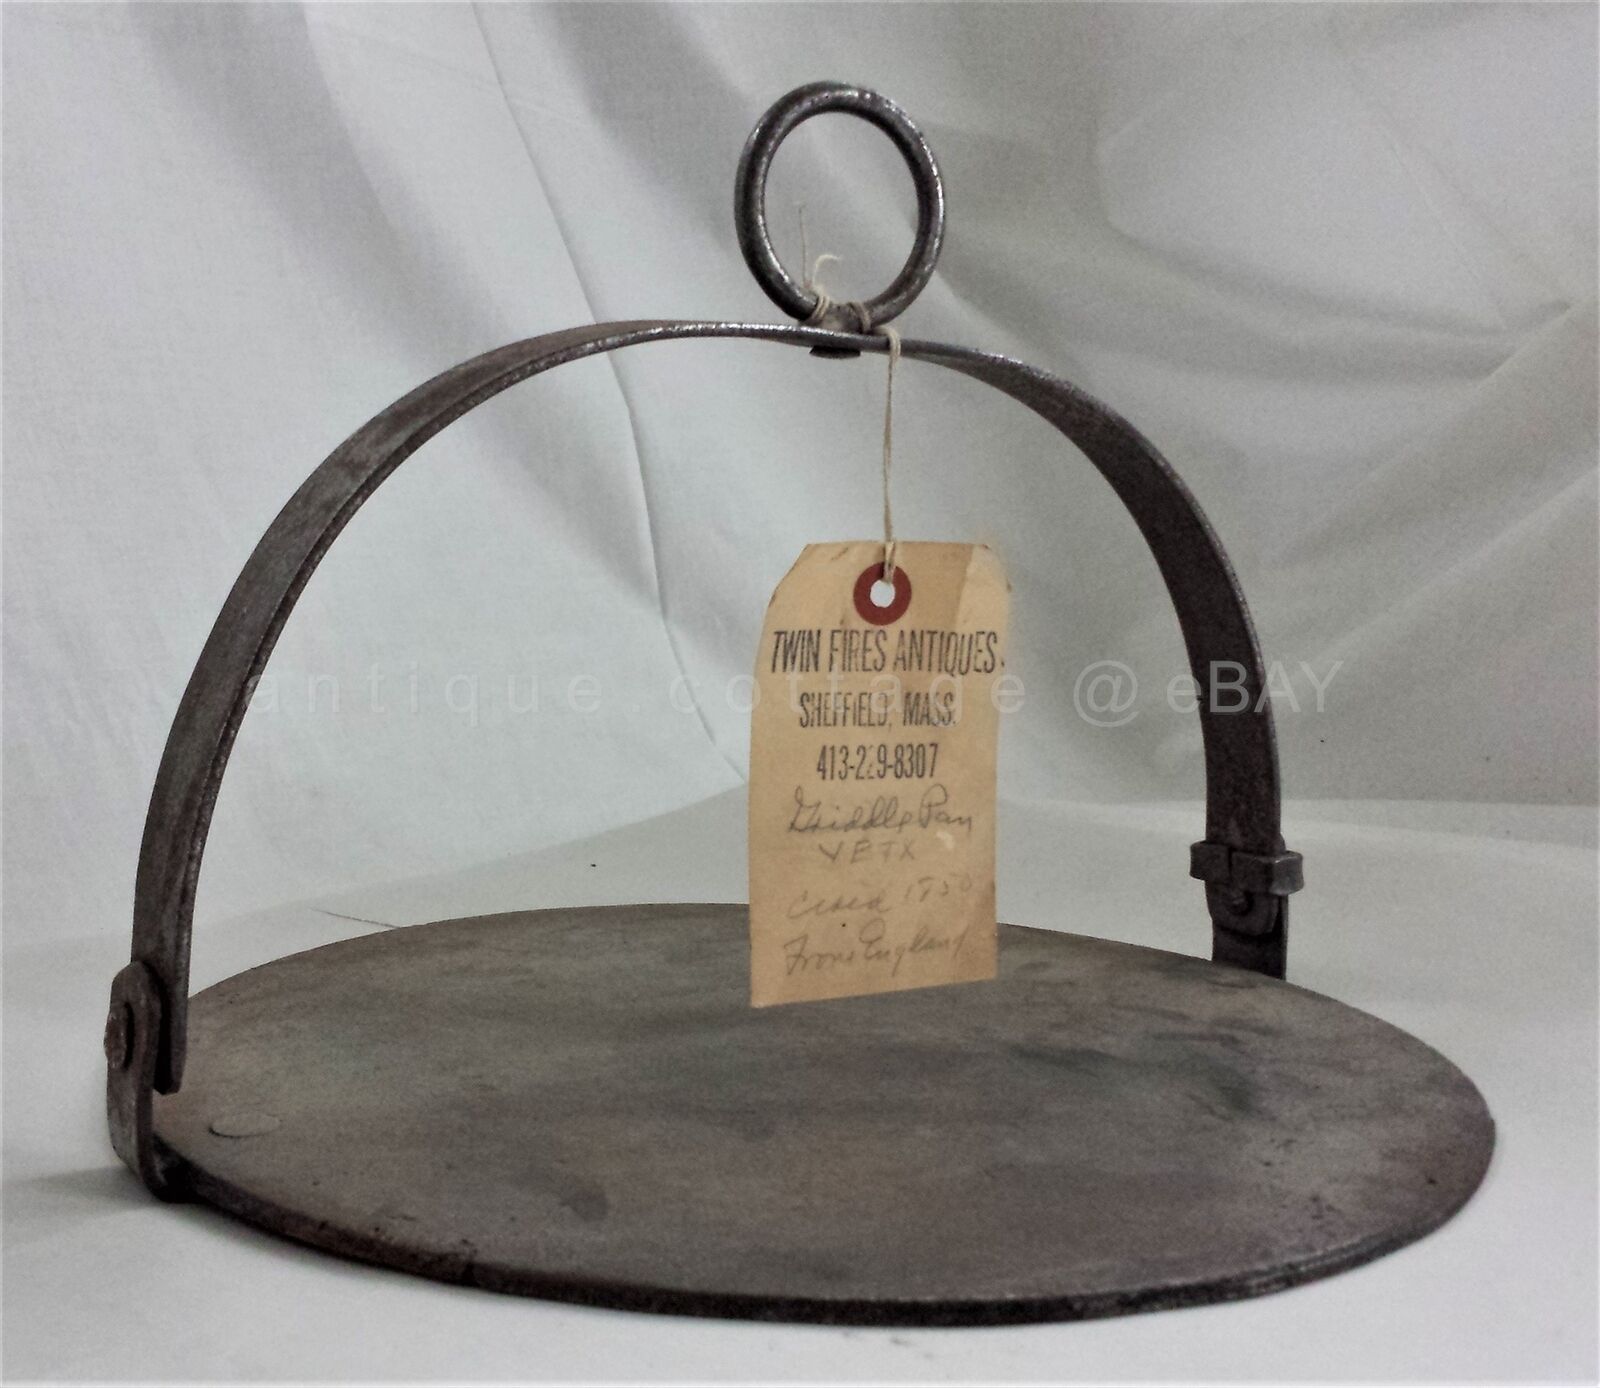 1750 antique GRIDDLE PAN WROUGHT IRON england heavy camp fireplace early cake